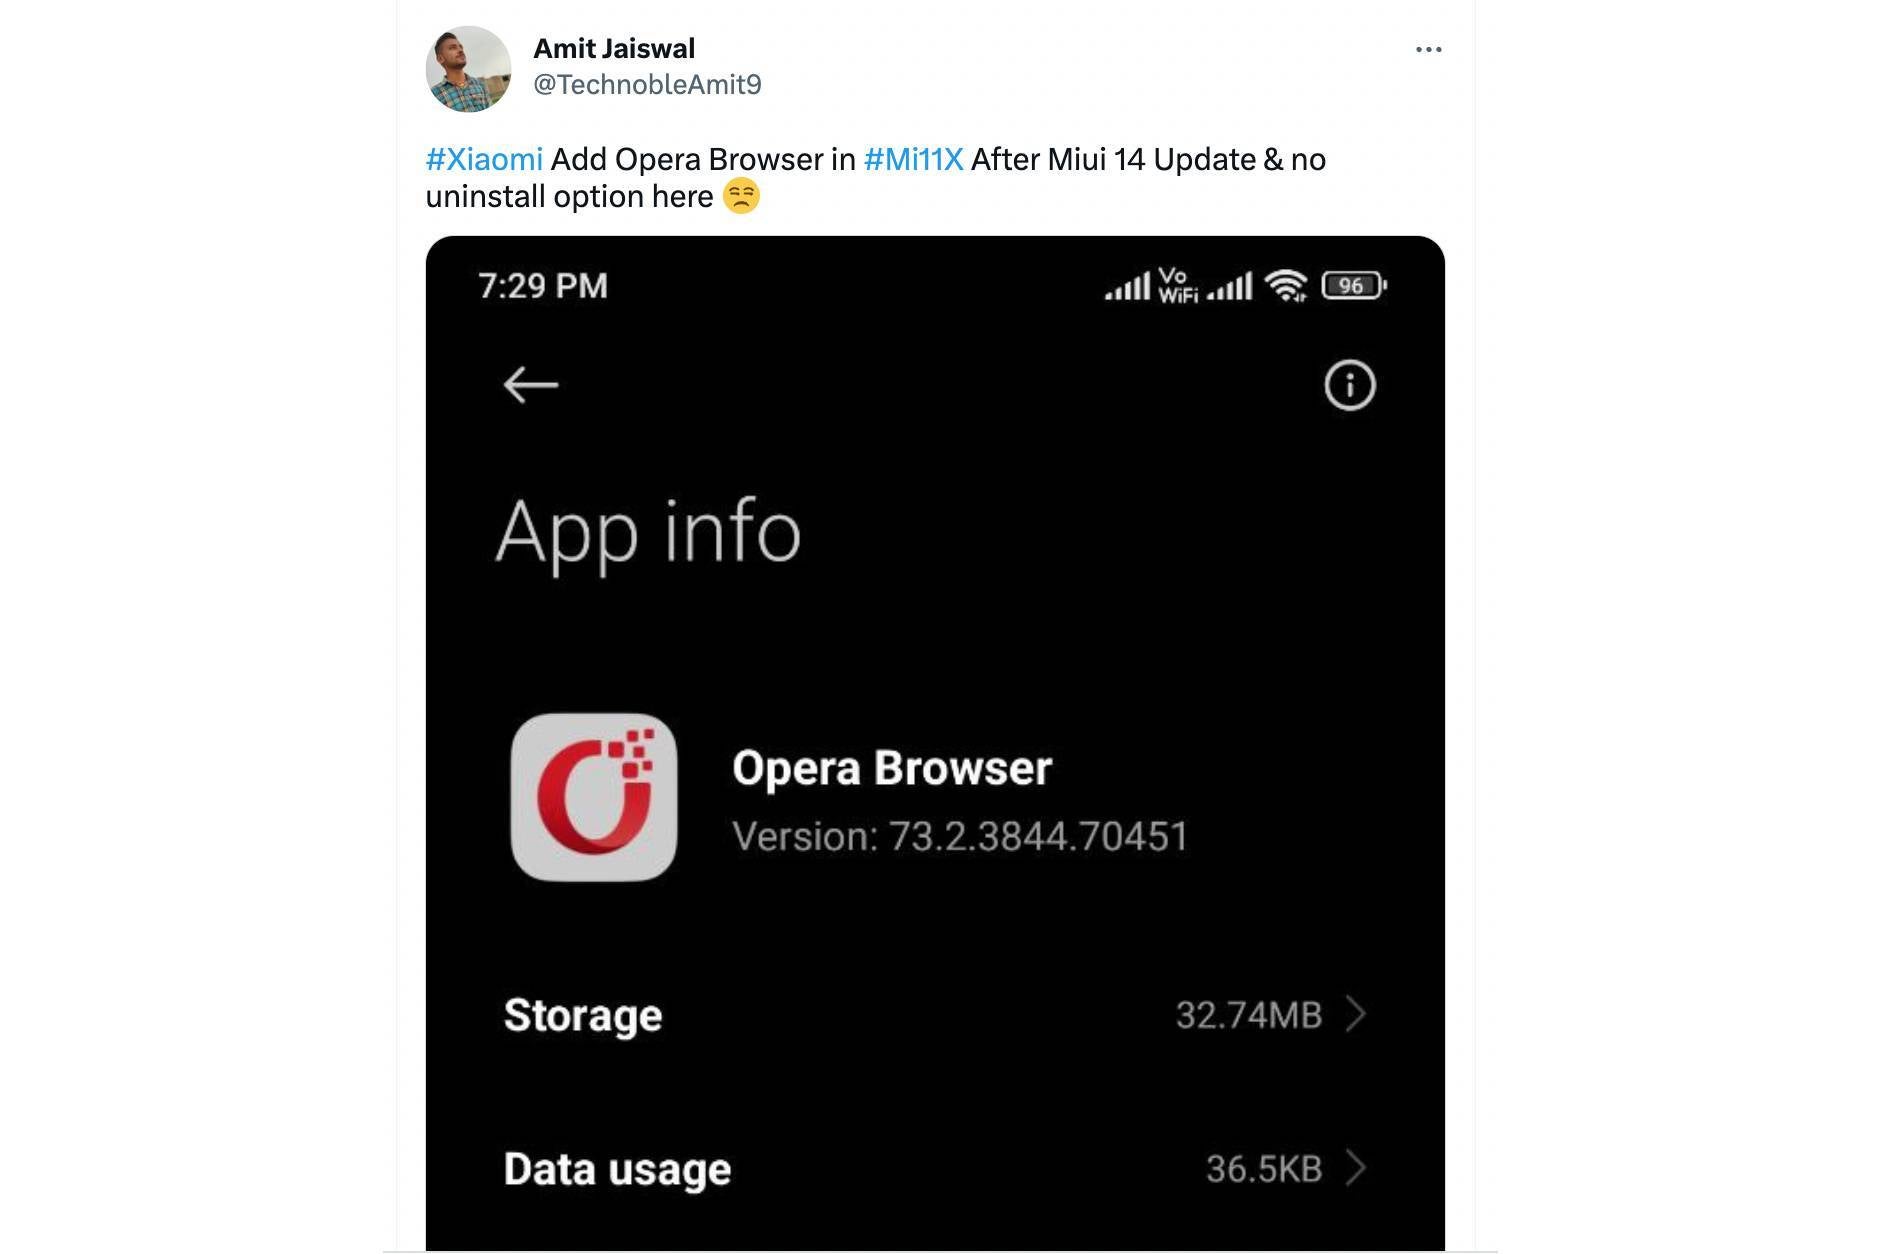 The forcible download of Opera has left some Indian users unhappy - Update installs a third browser on Xiaomi phones with no removal option in one market